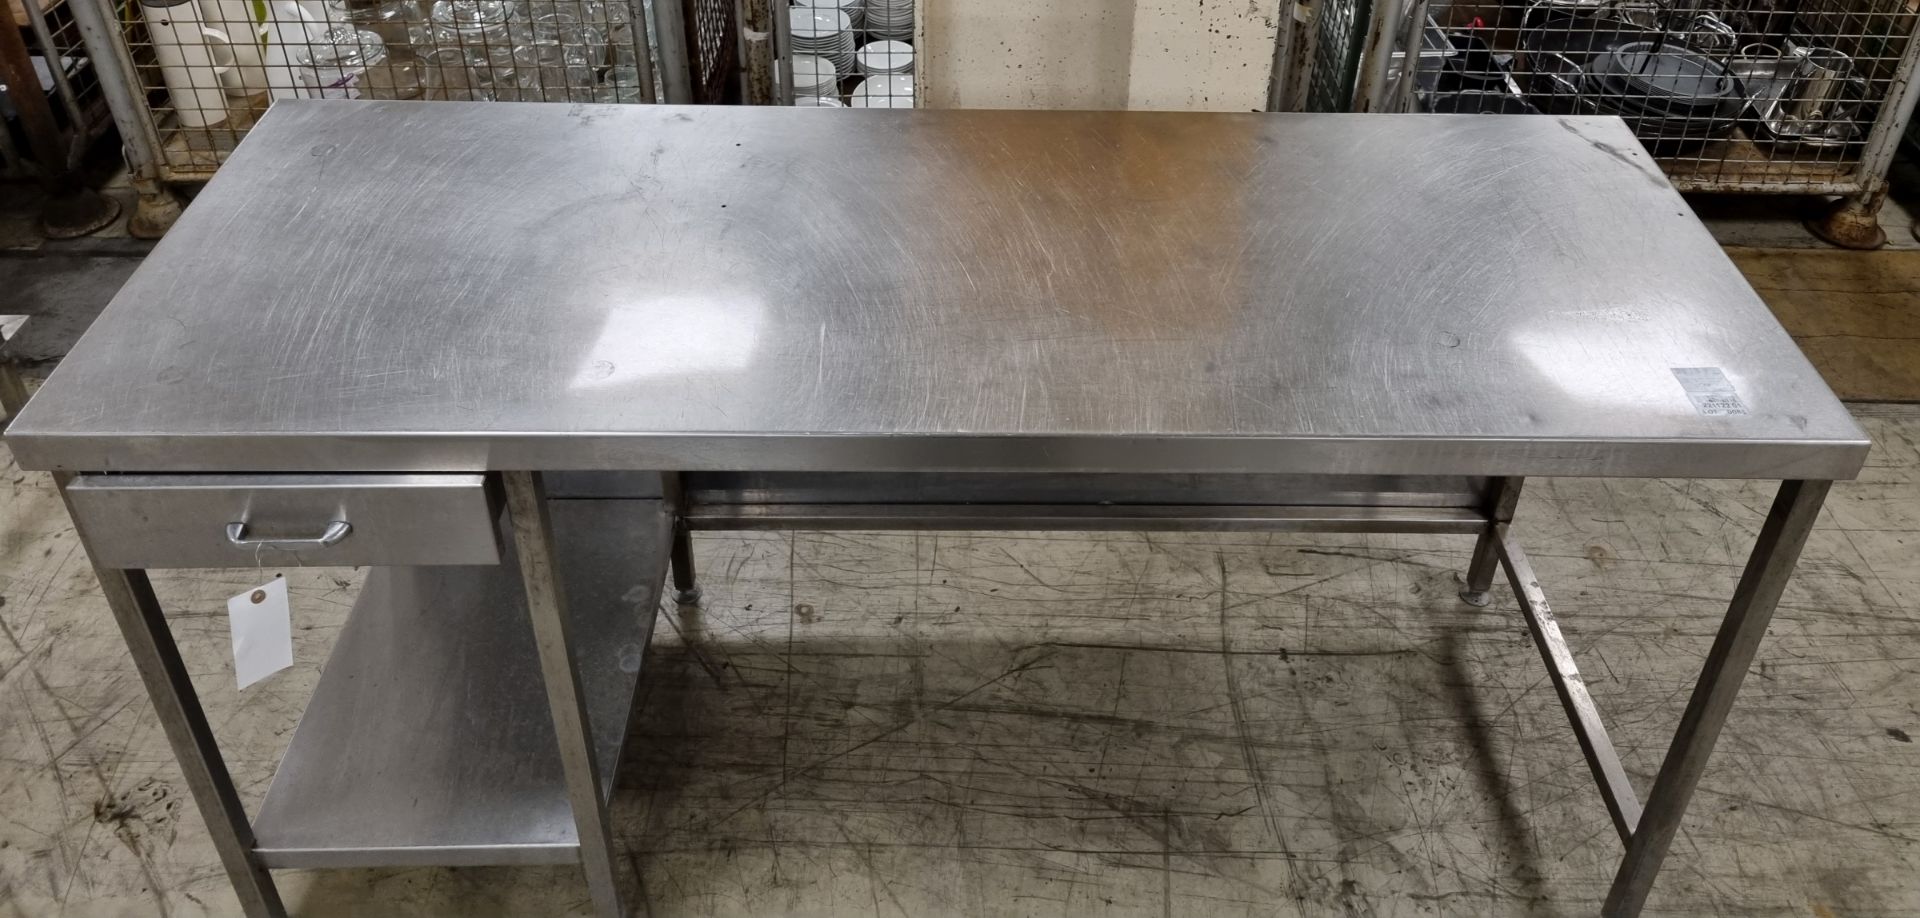 Stainless steel countertop with shelf and back wall - 65x180x92cm - Image 2 of 7